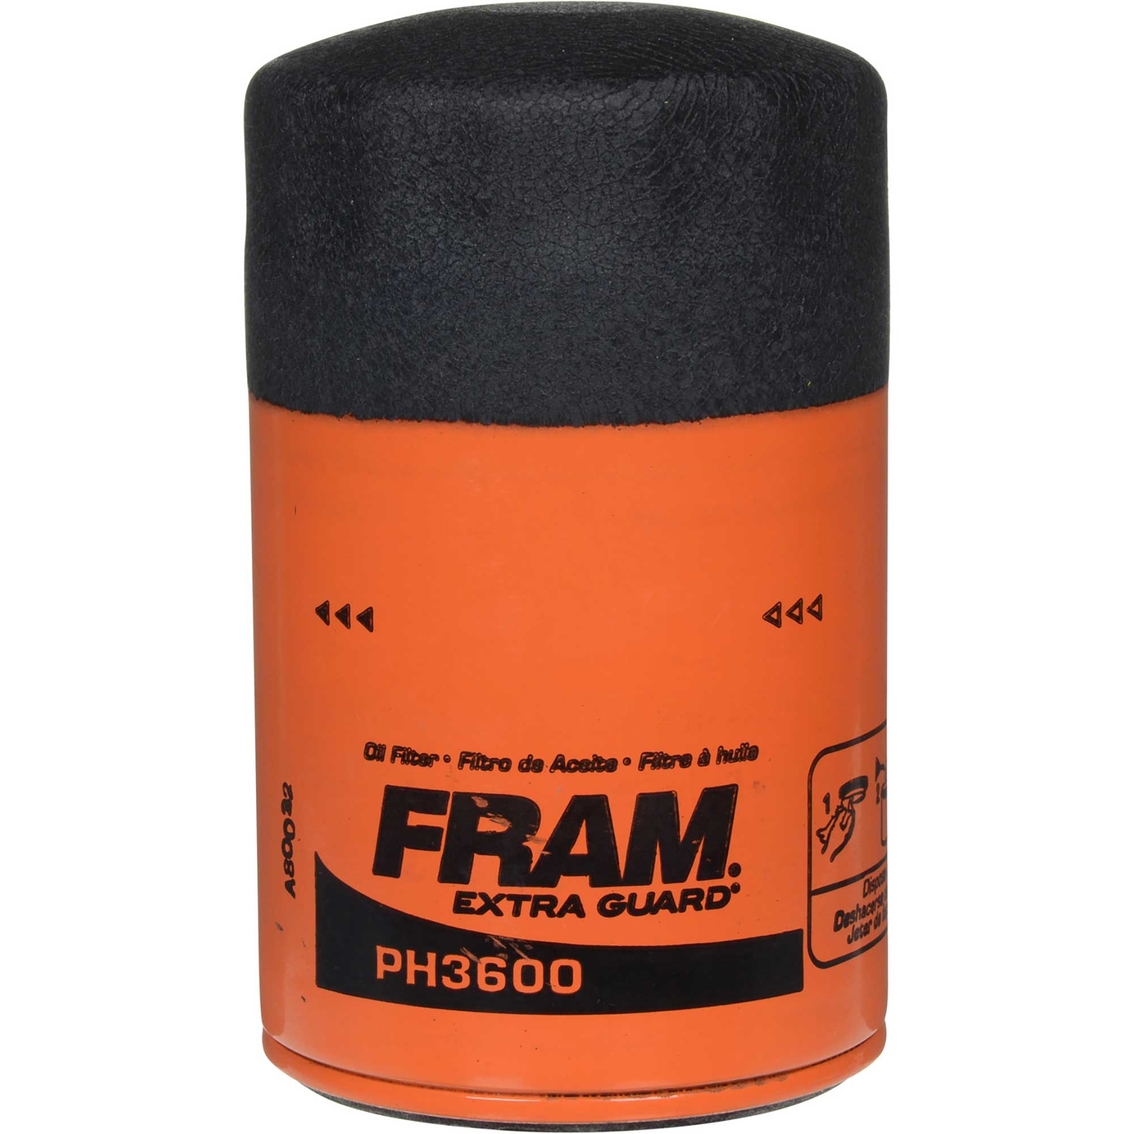 FRAM Extra Guard Oil Filter Spin-On - Image 2 of 2